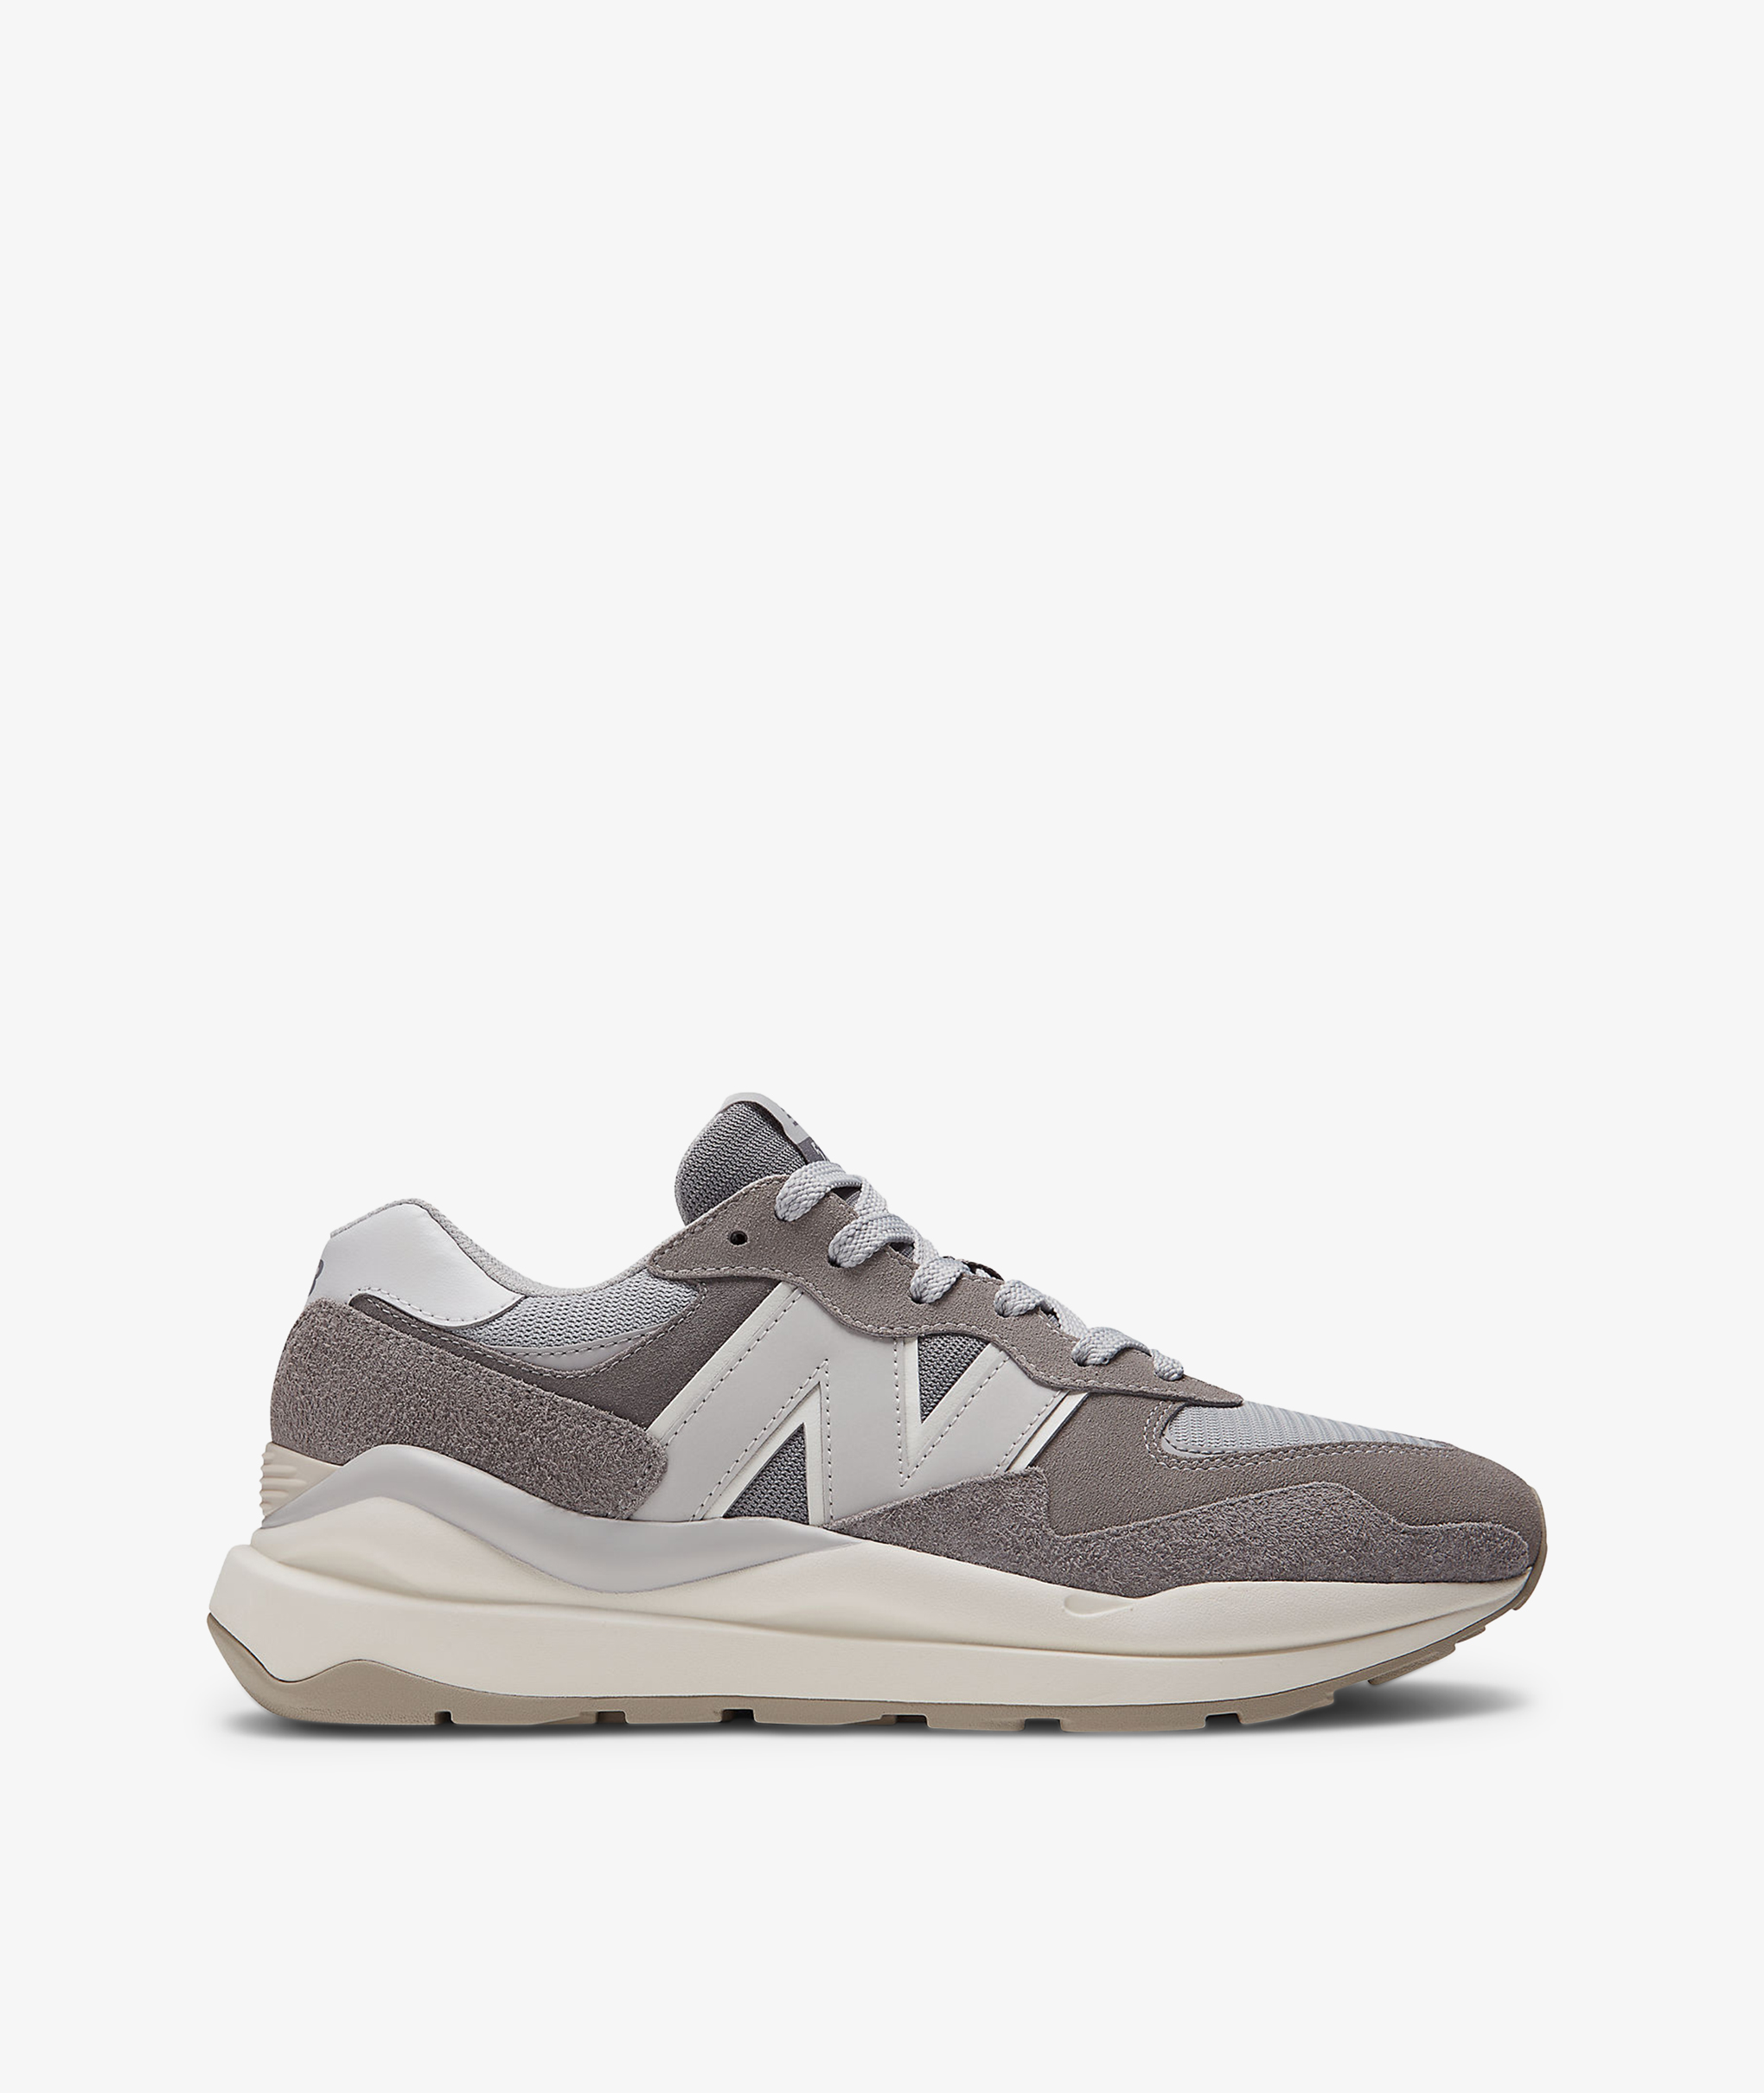 Norse Store | Shipping Worldwide - New Balance M5740 - Marblehead